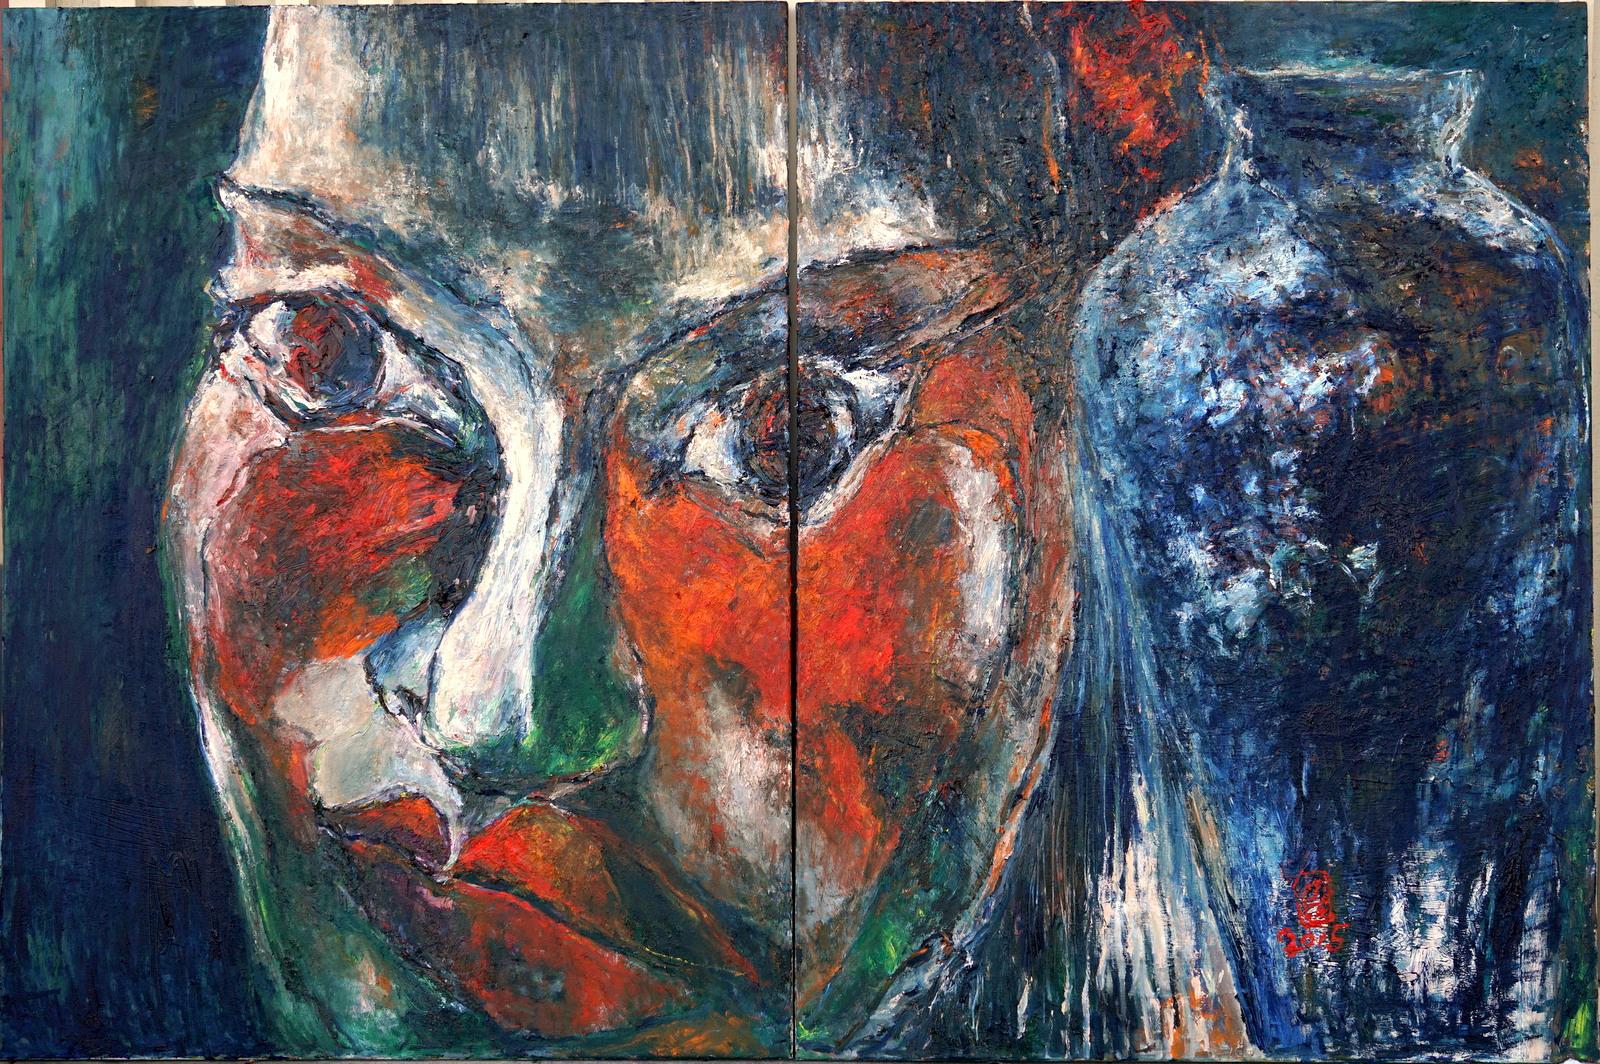 ‘Cleansing Actress Series No. 5’ Diptych Portrait Oil On Canvas By Duan